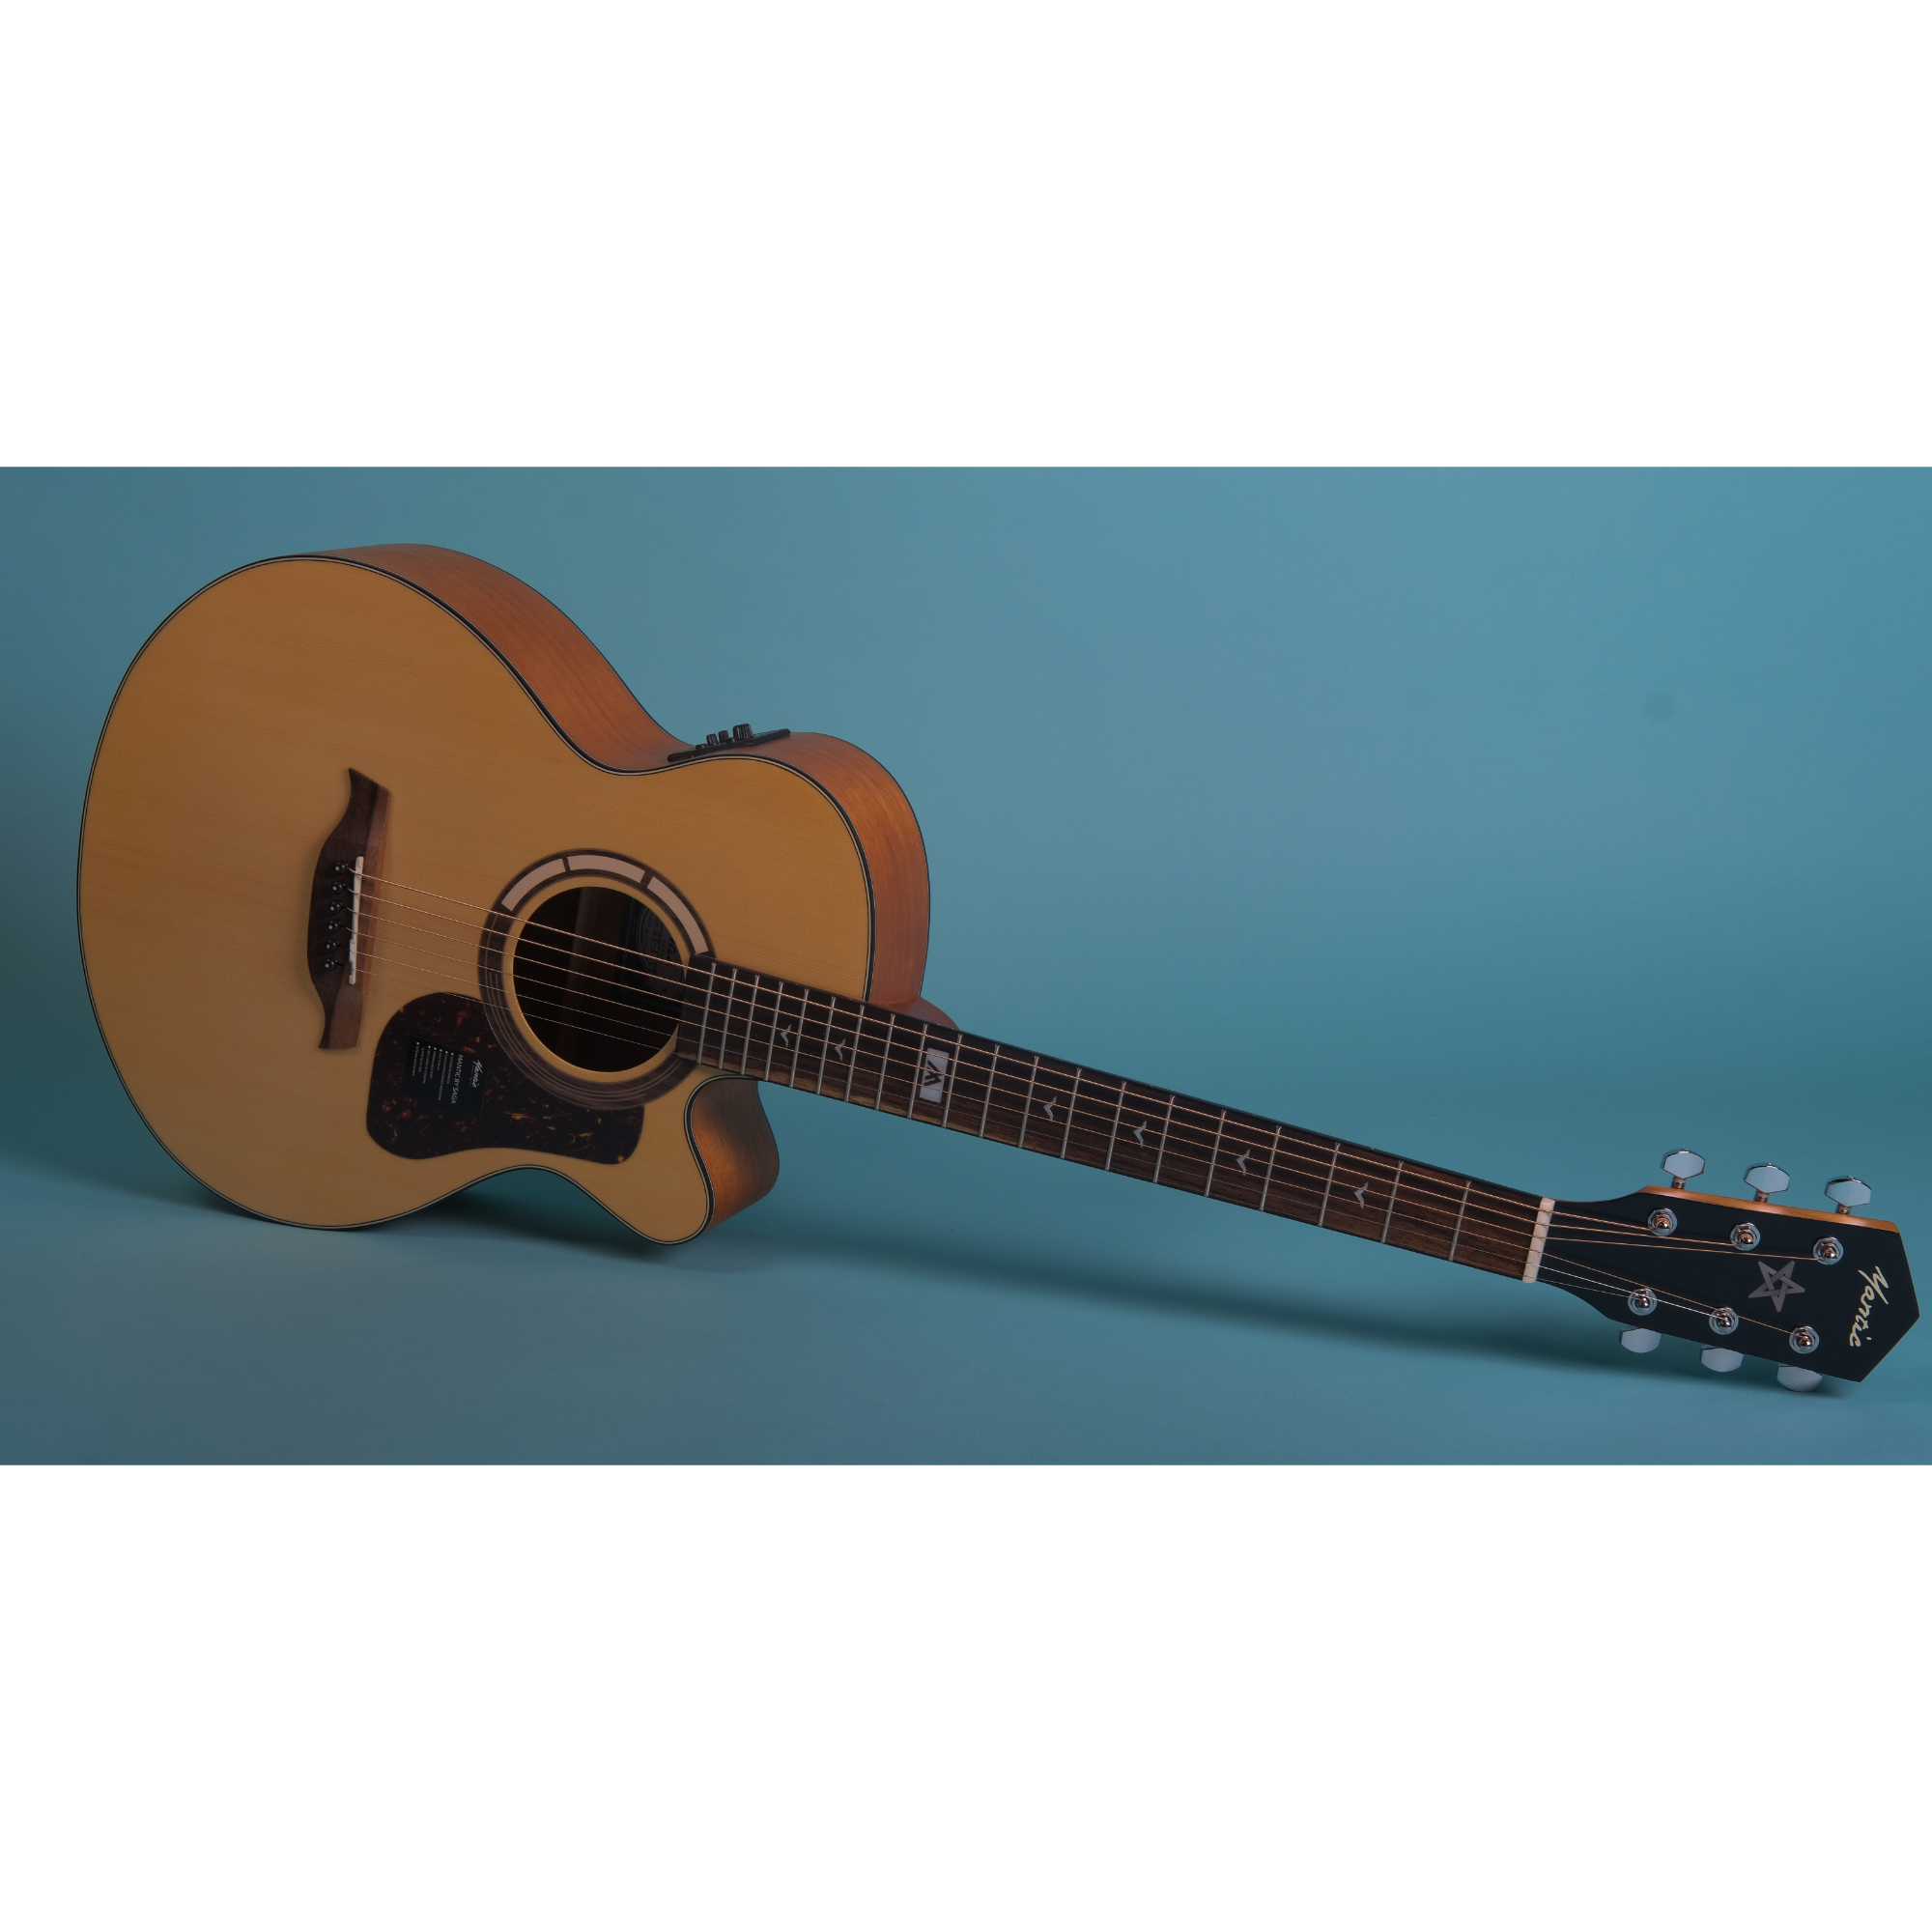 Mantic GT10AC -E Solid Top Semi- Acoustic Guitar with Fishman Electronics